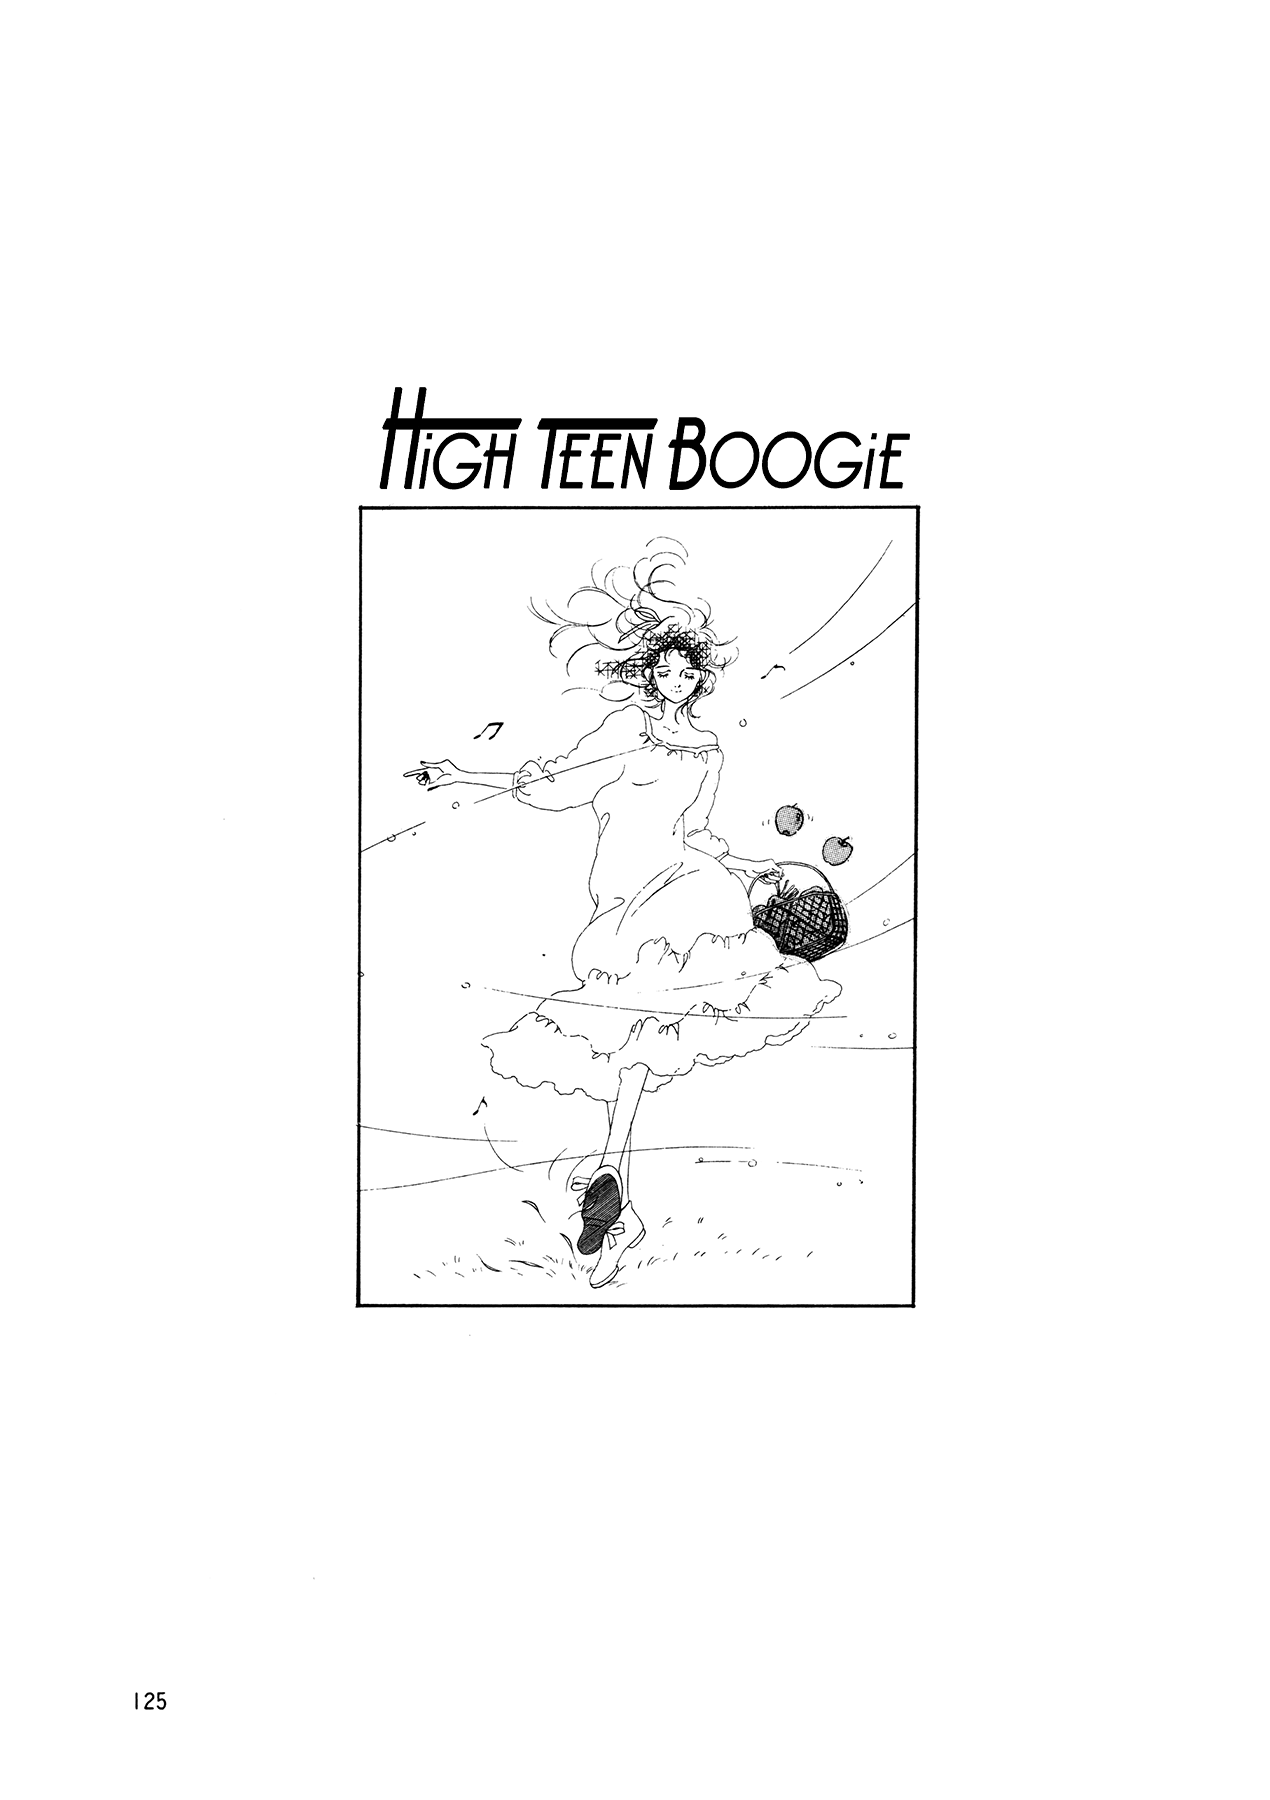 High Teen Boogie - Page 2